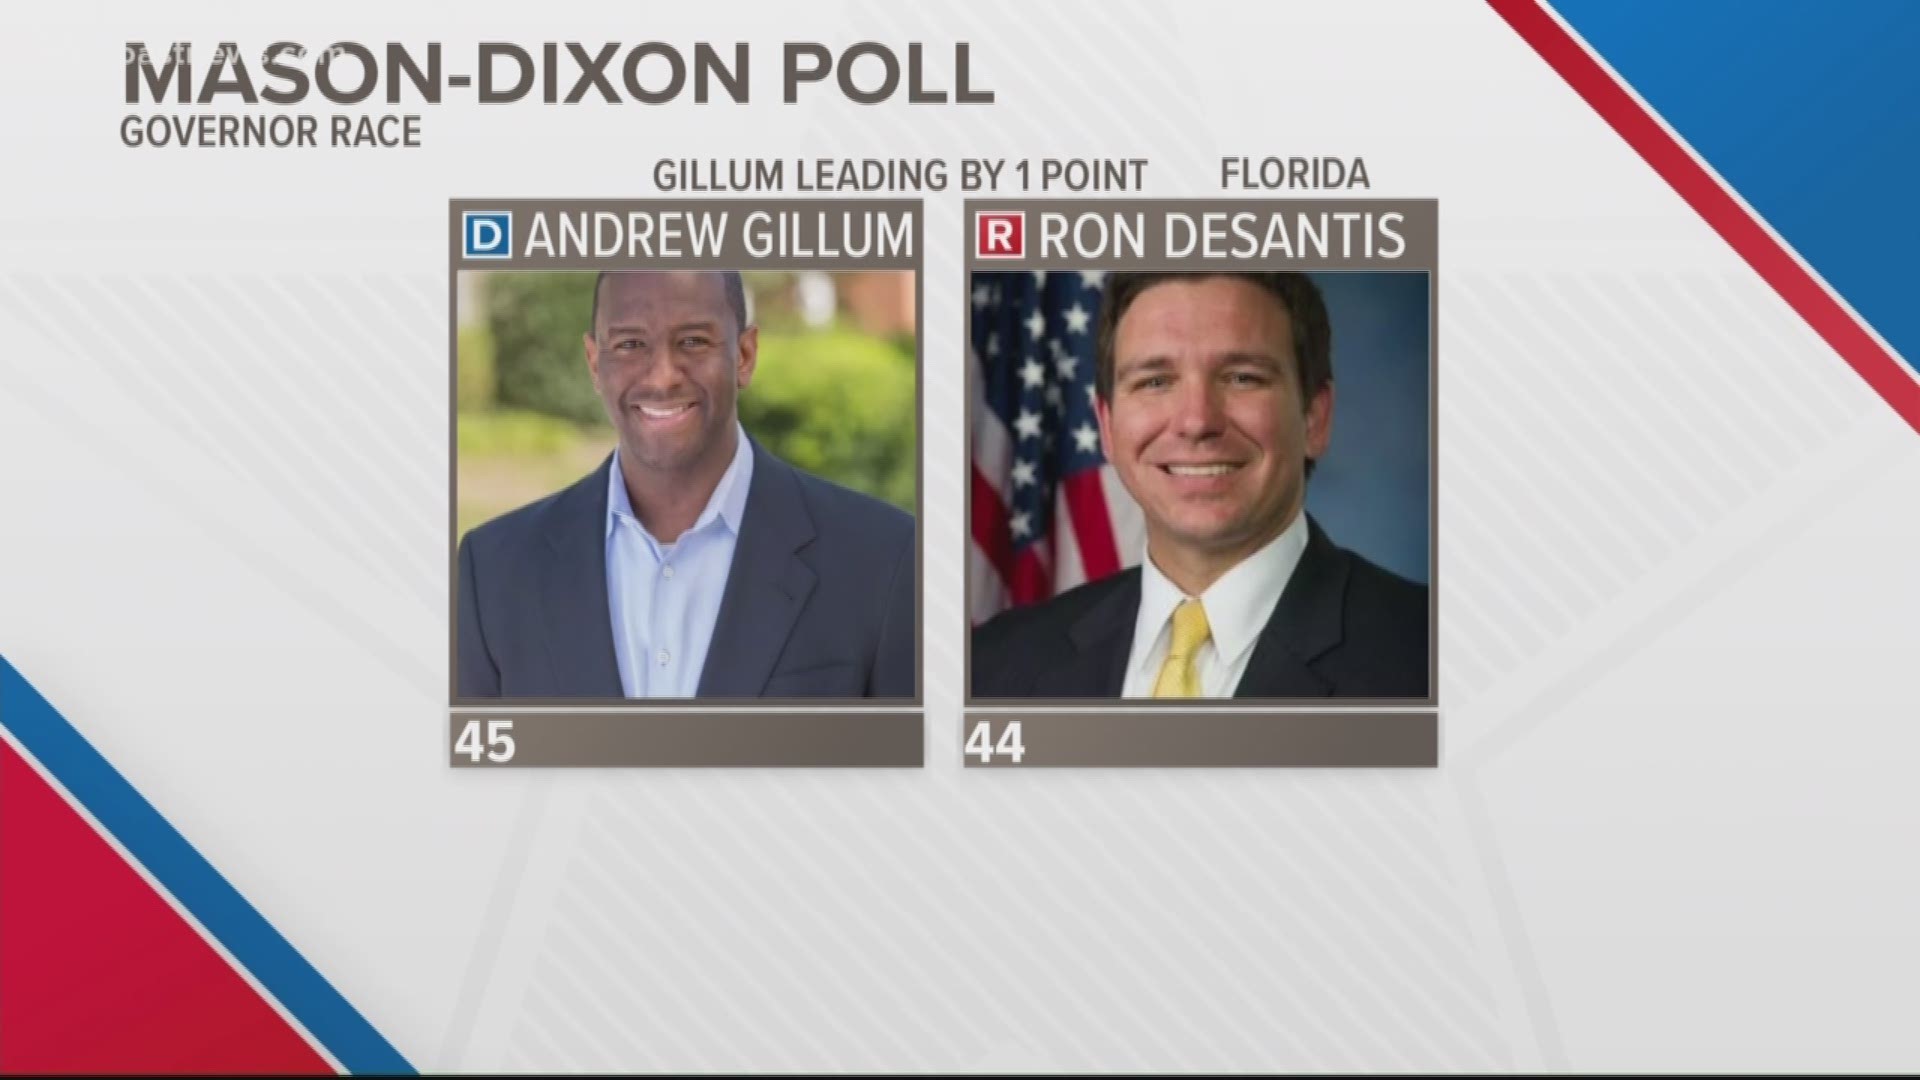 It's a very close race for Florida Governor. The Mason-Dixon numbers show Democratic candidate Andrew Gillum with a one point lead over Republican candidate Ron DeSantis.